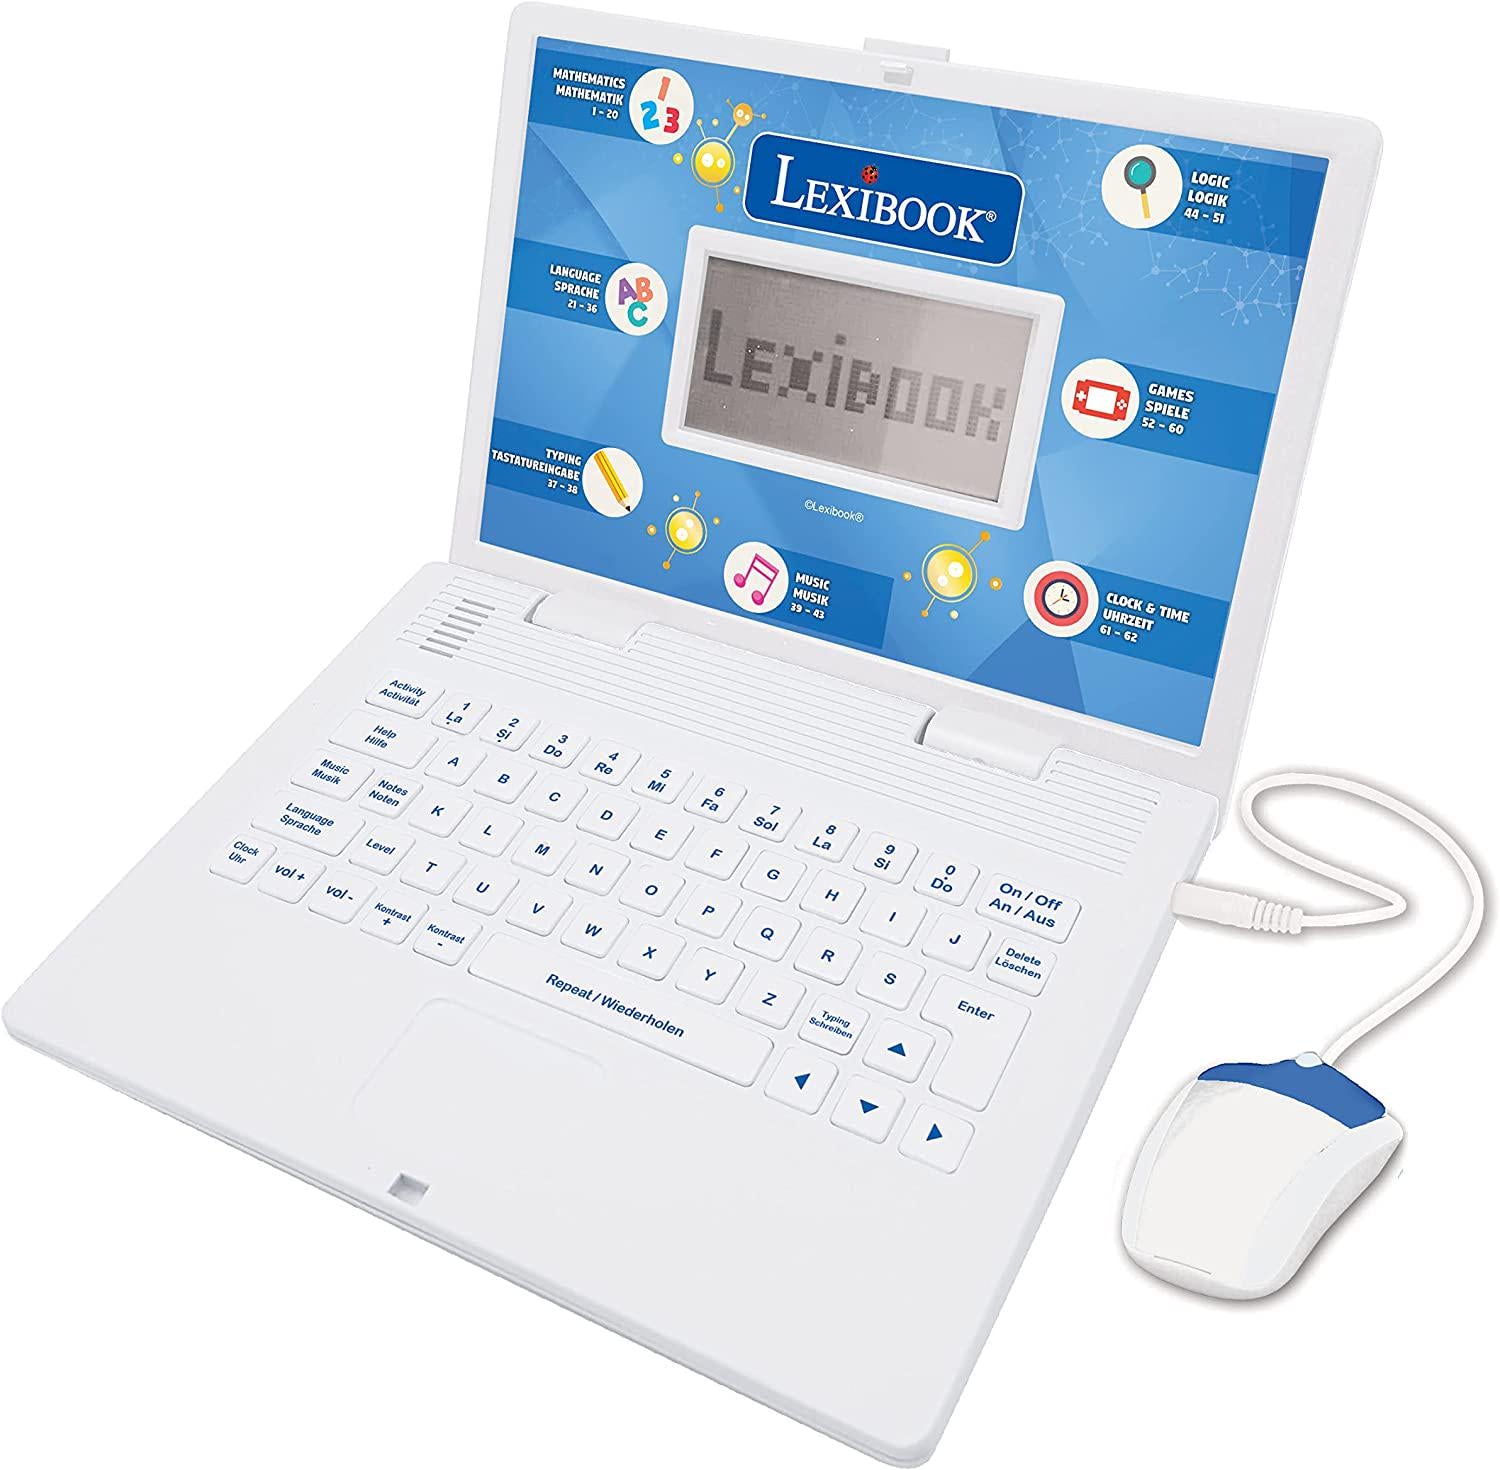 Lexibook, LEXIBOOK JC598i3 Educational and Bilingual Laptop German/English-Toy with 124 Activities to Learn, Play Games and Music-Blue/White